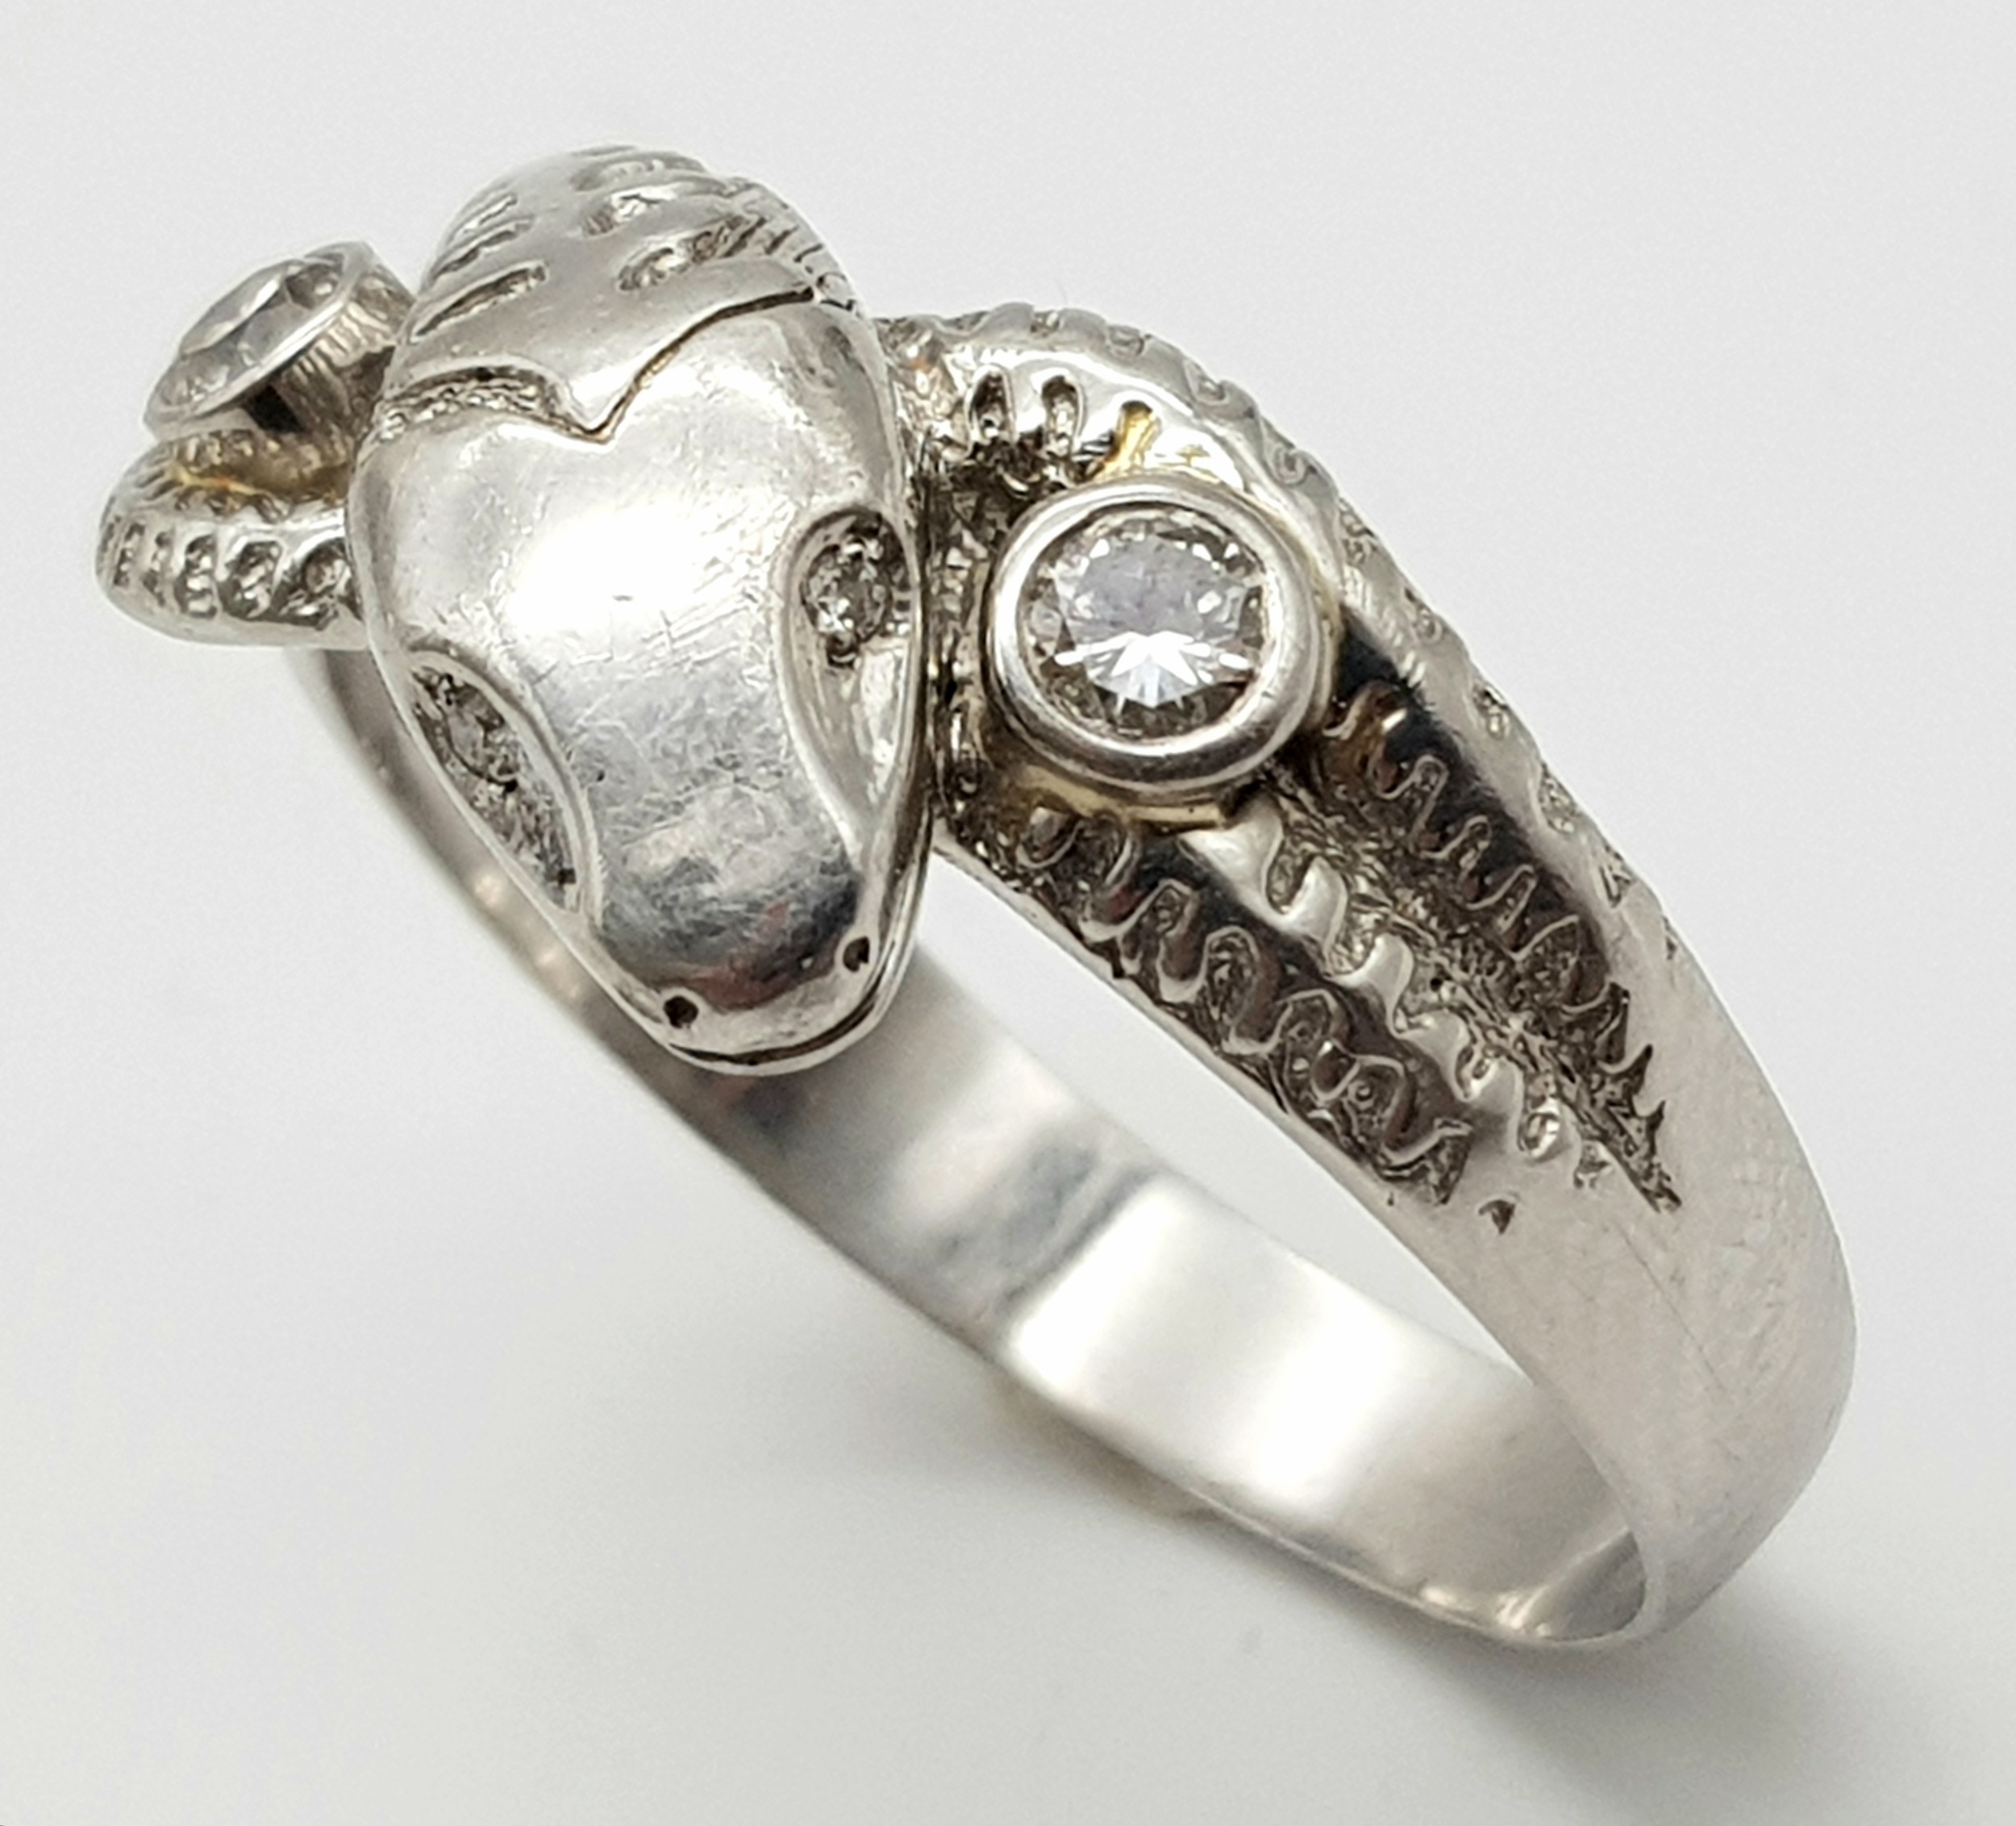 A Very Large 950 Platinum and Diamond Snake Ring. A coiling serpent with diamond eyes and body. Size - Image 3 of 5